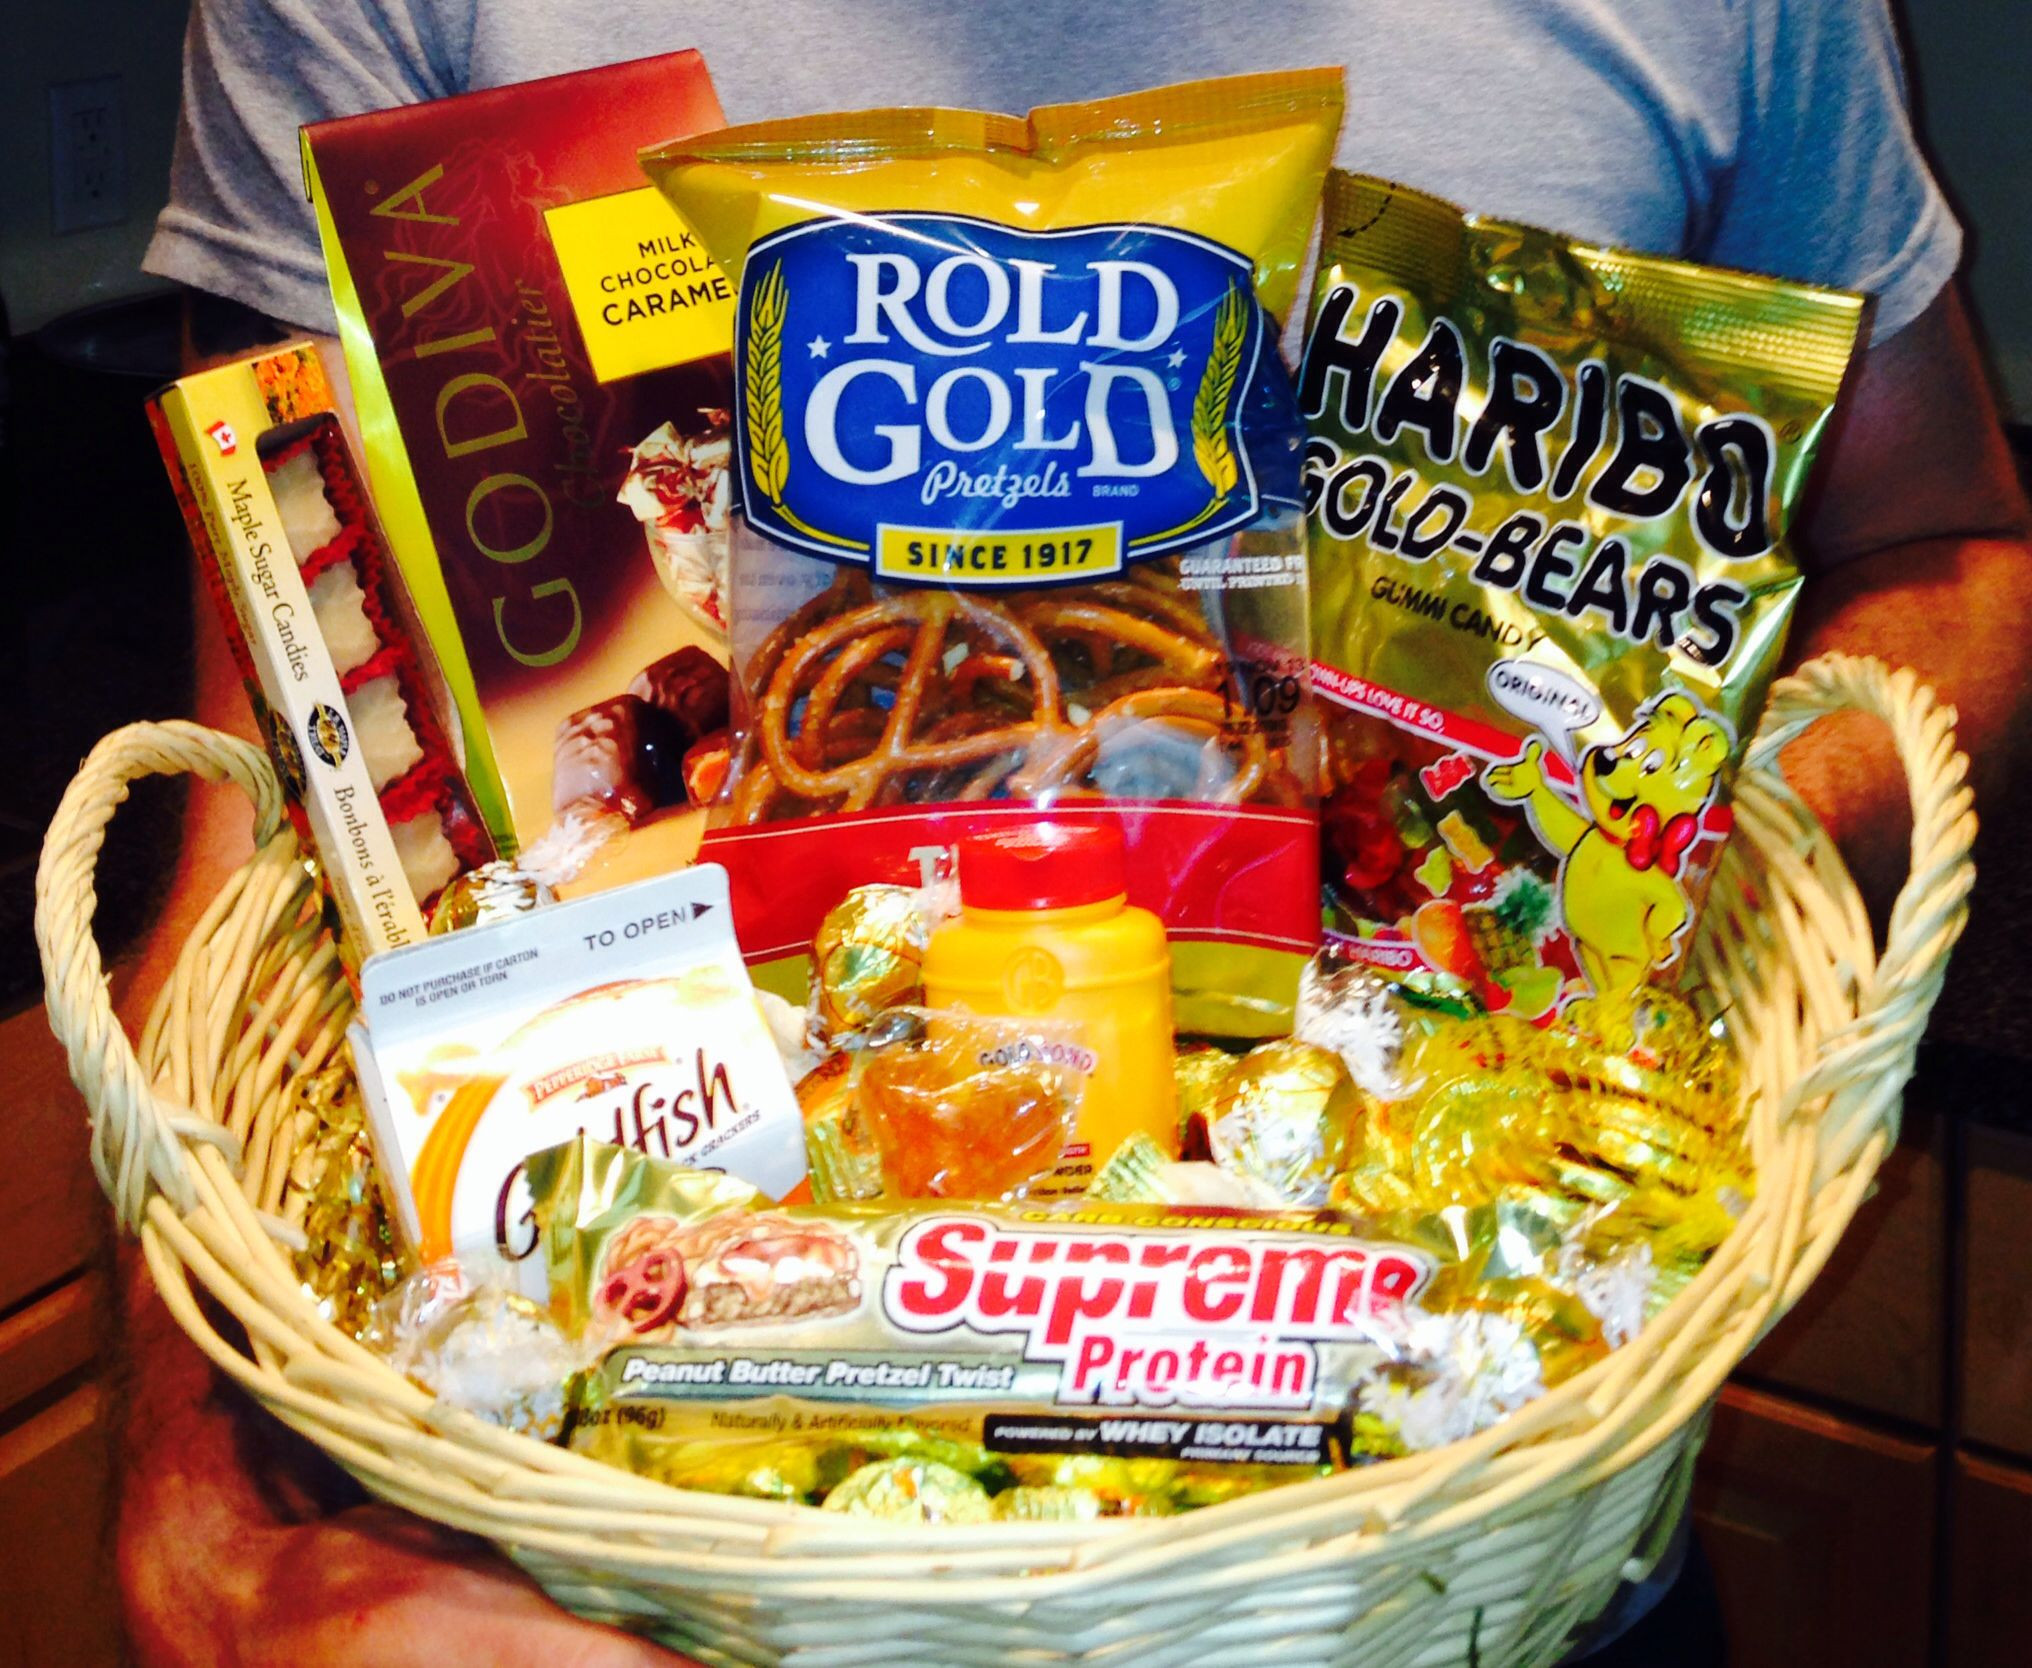 Golden Birthday Gift Ideas For Him
 Basket of "gold" for a Golden Birthday t when you turn